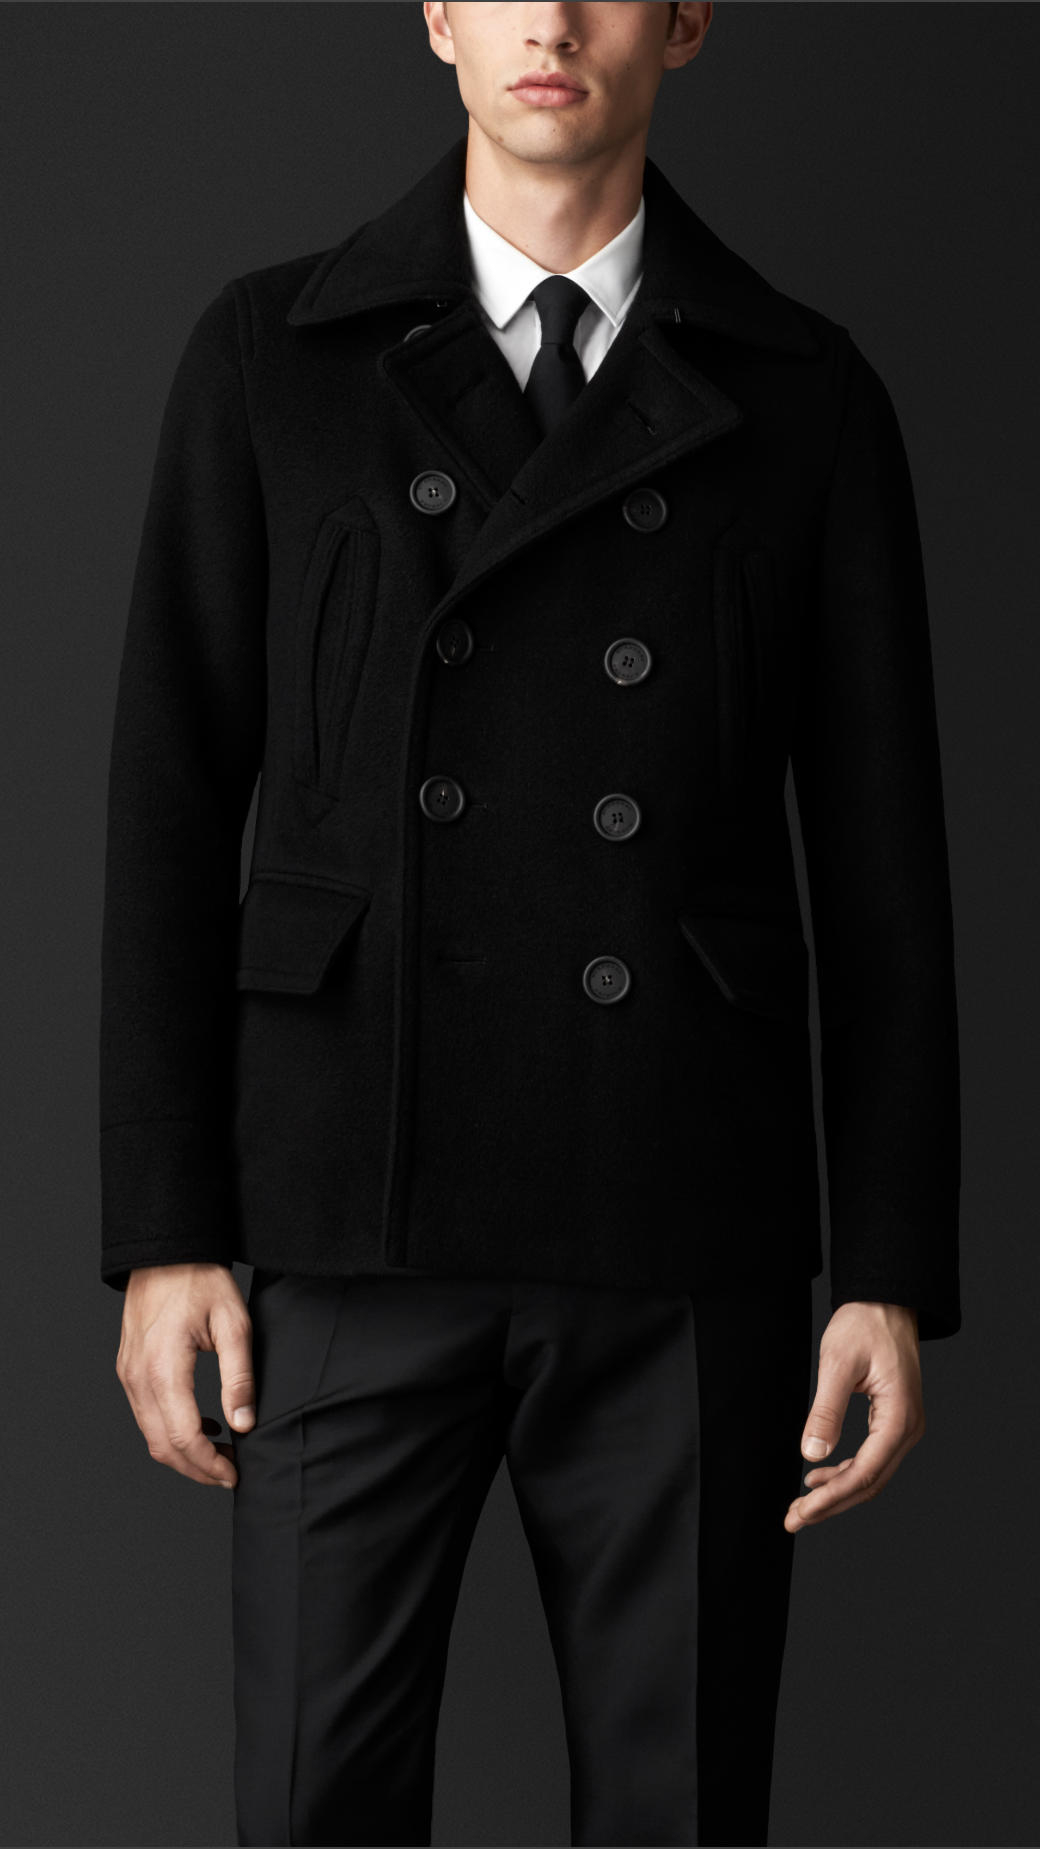 Burberry Cashmere Wool Pea Coat in Black for Men - Lyst